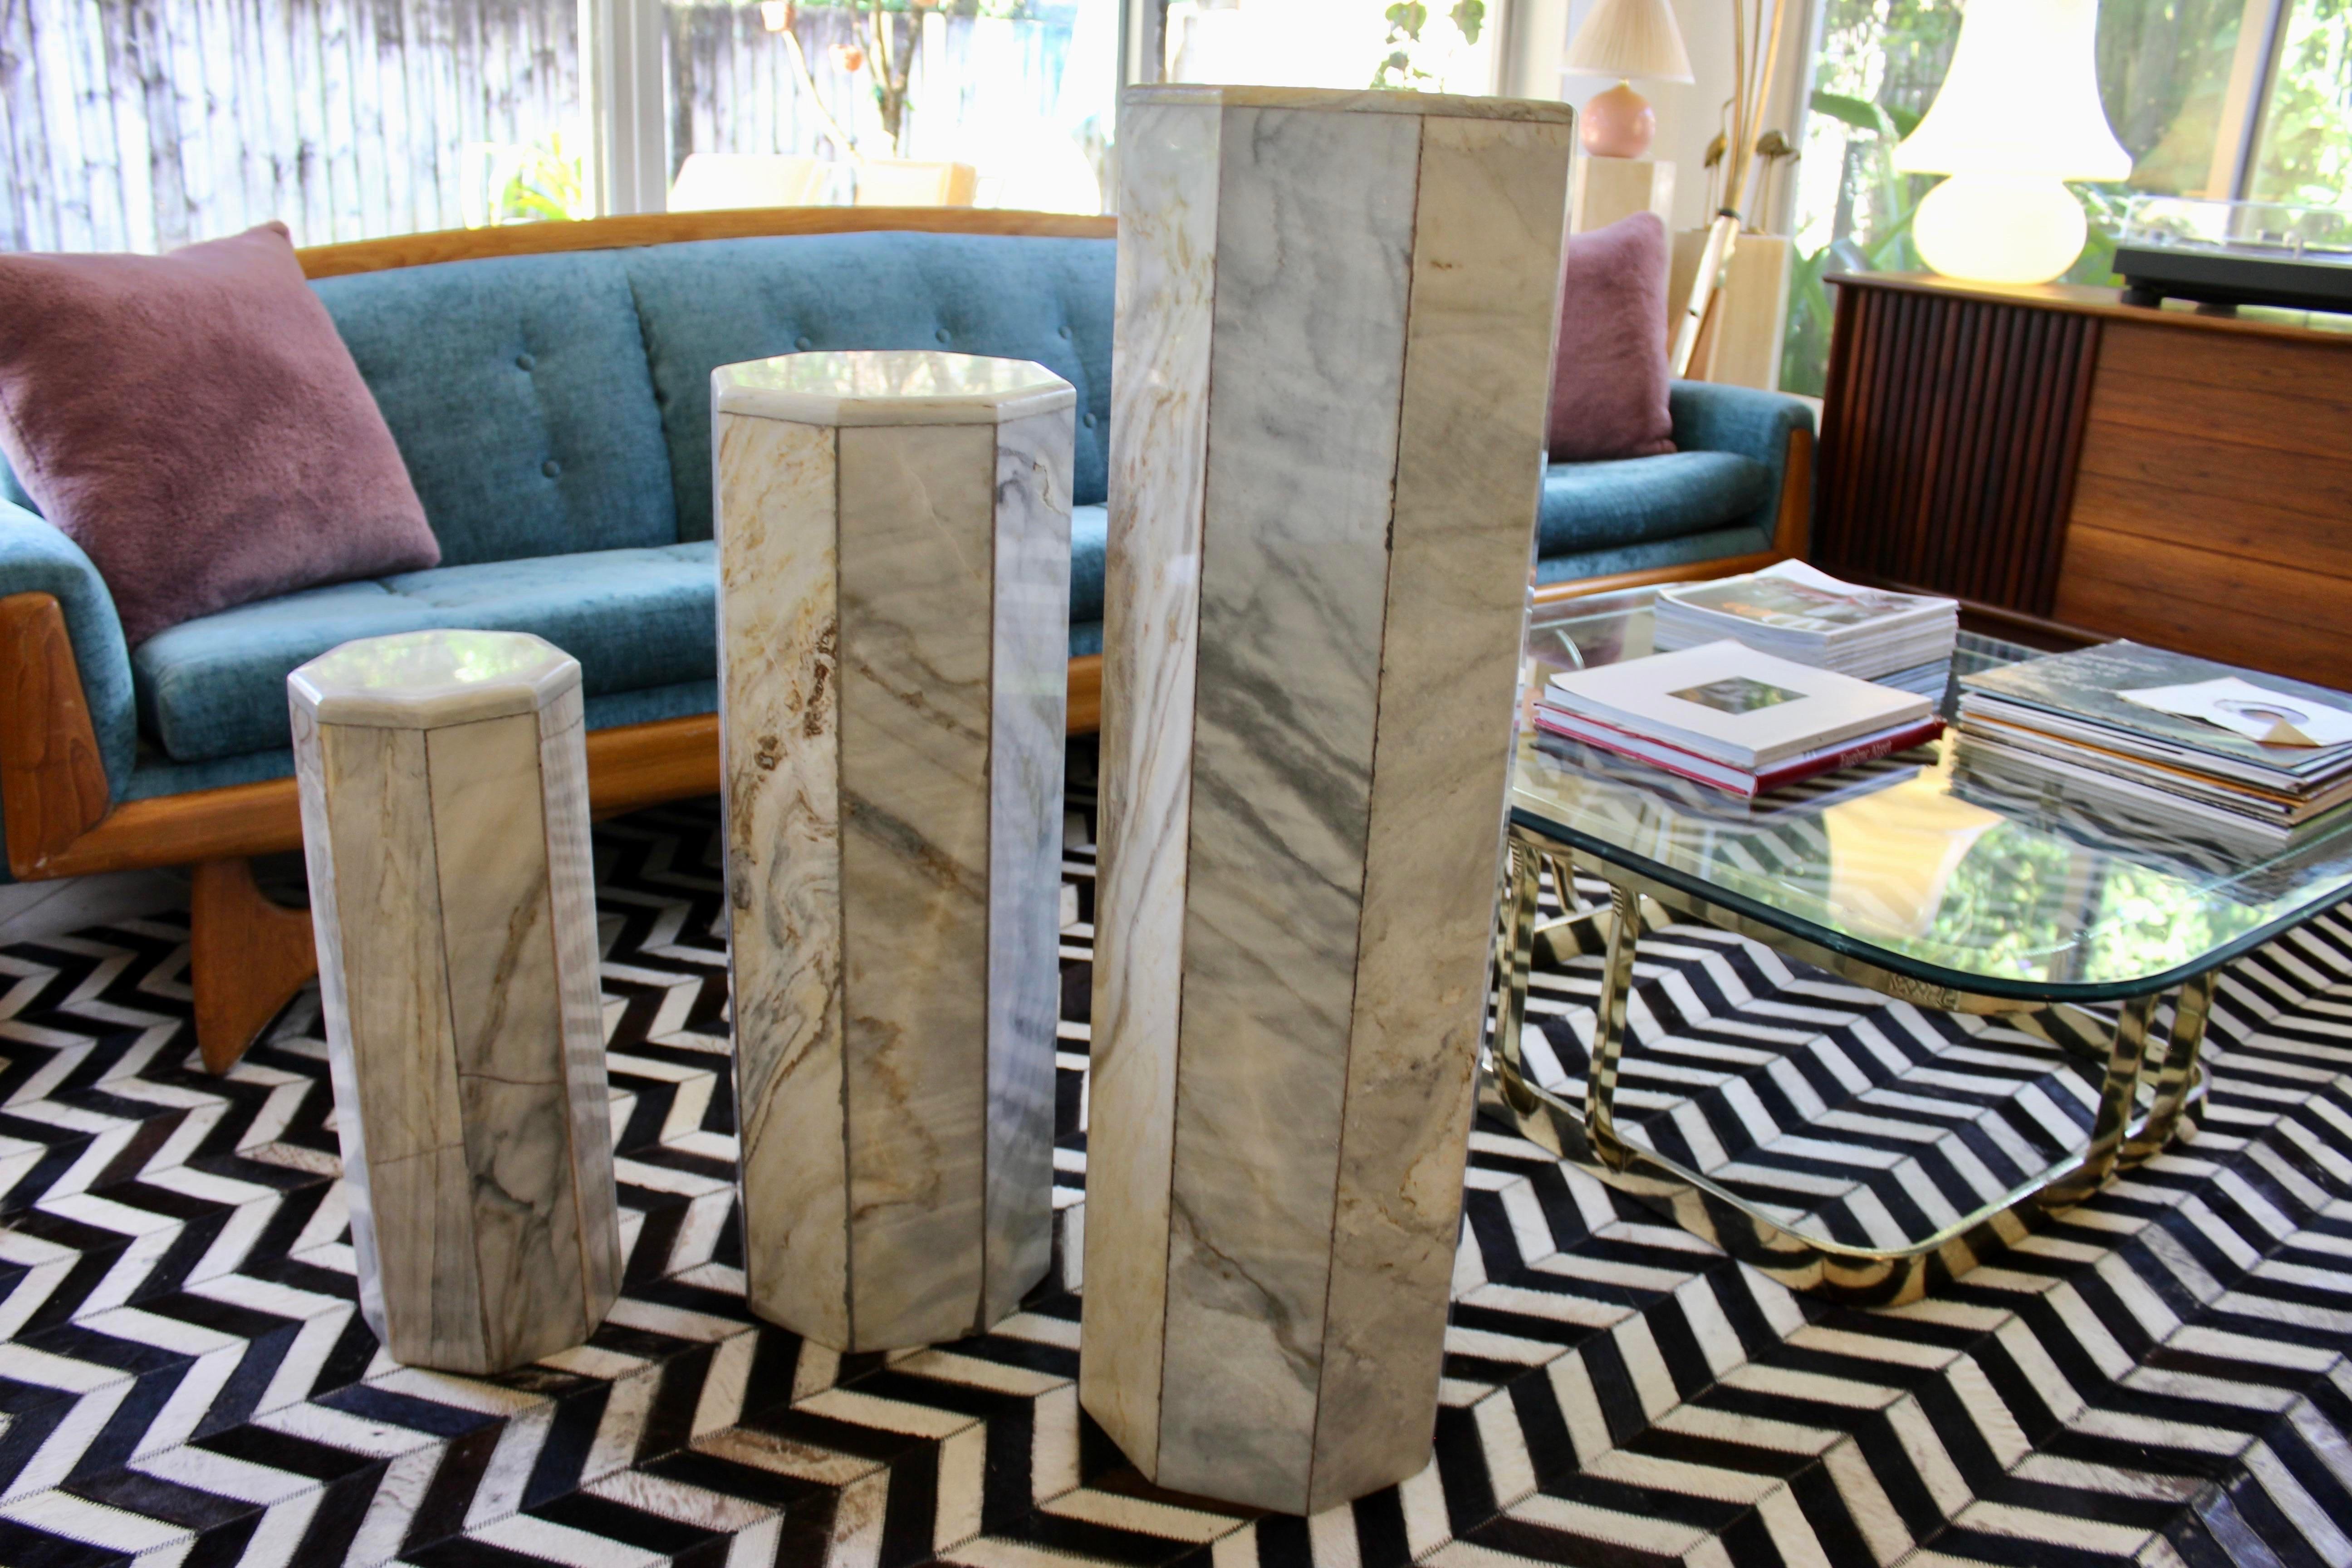 Set of 3 Midcentury Modern Hexagonal Pedestals In Good Condition For Sale In Hollywood, FL